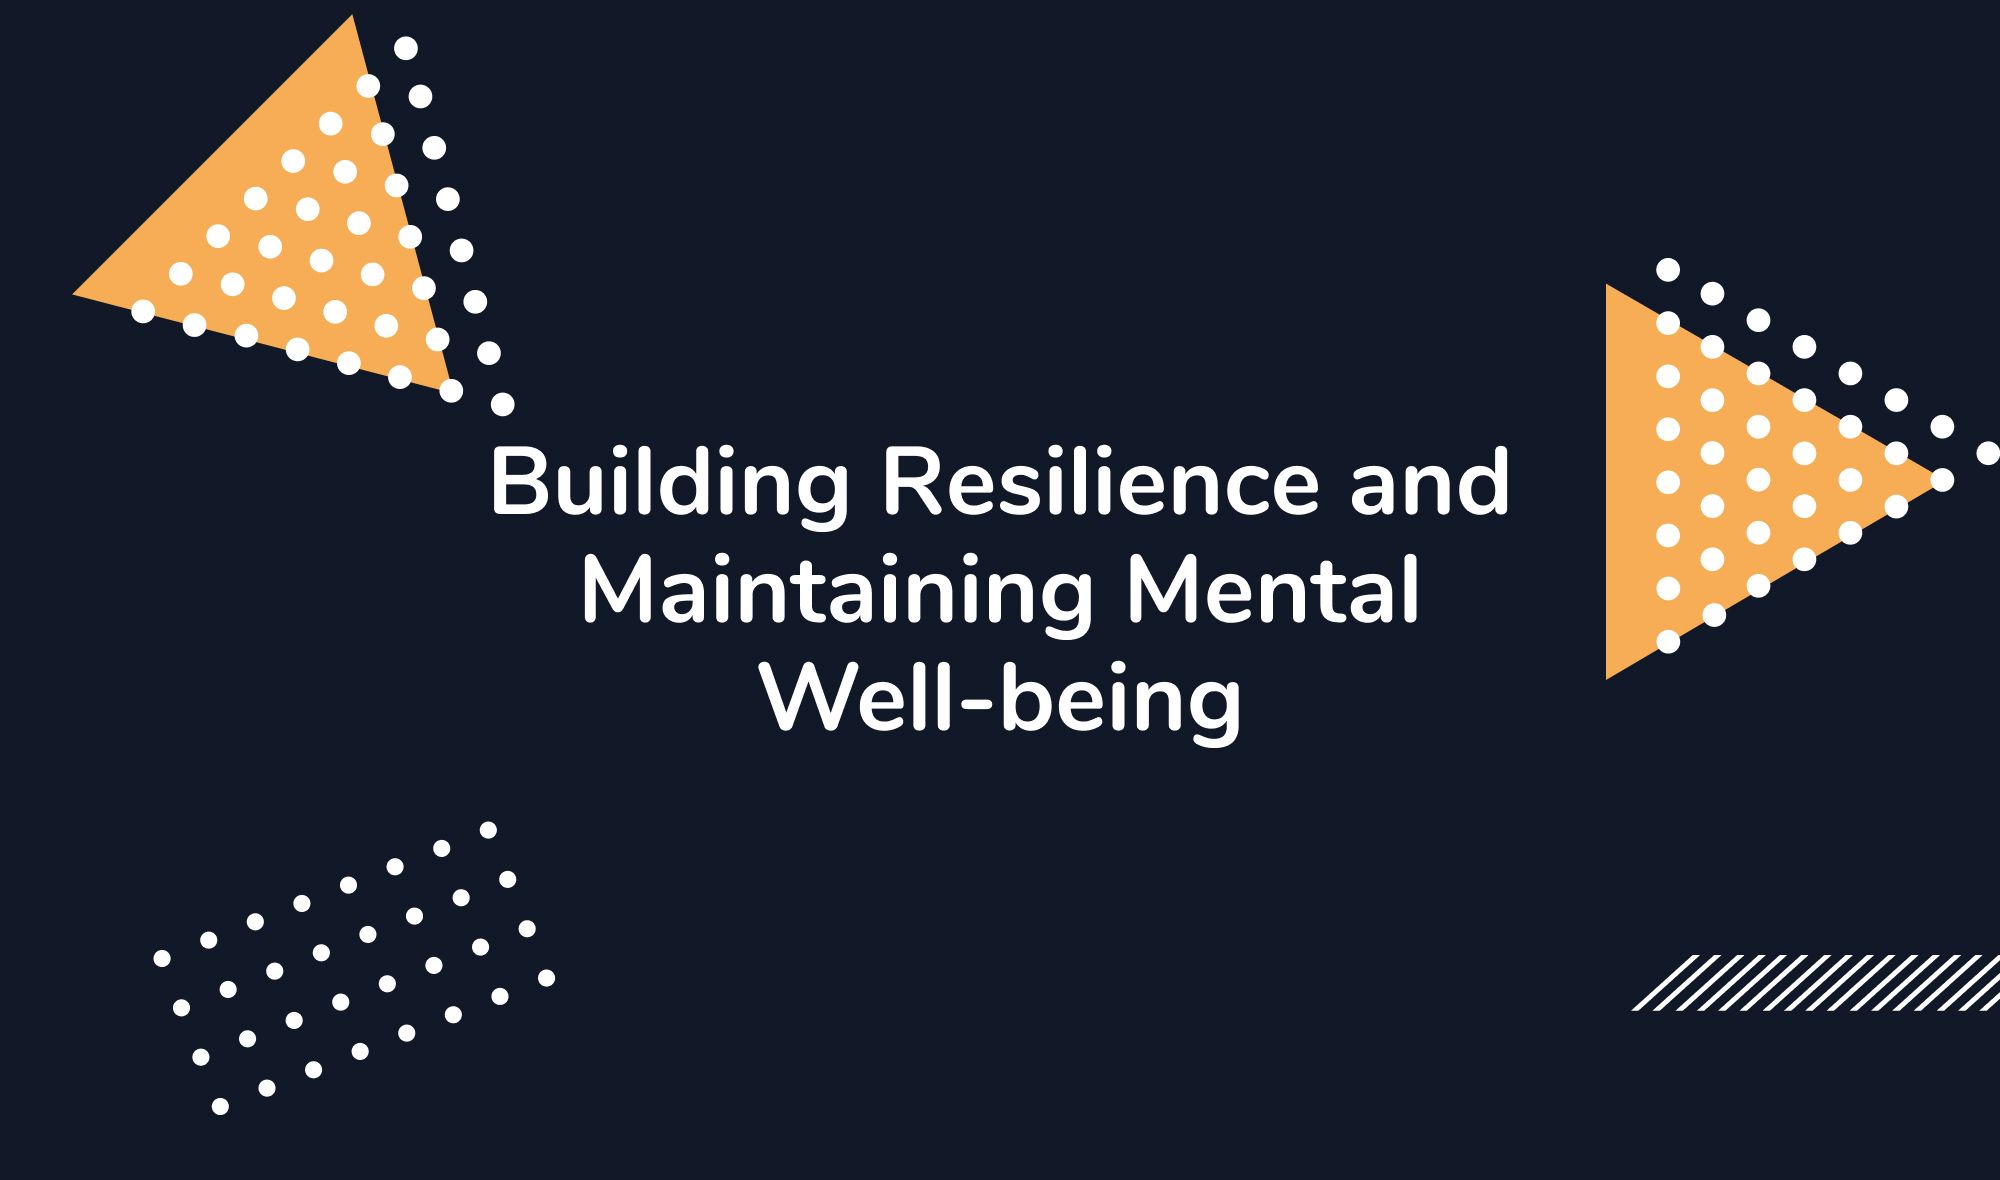 Building Resilience and Maintaining Mental Well-being